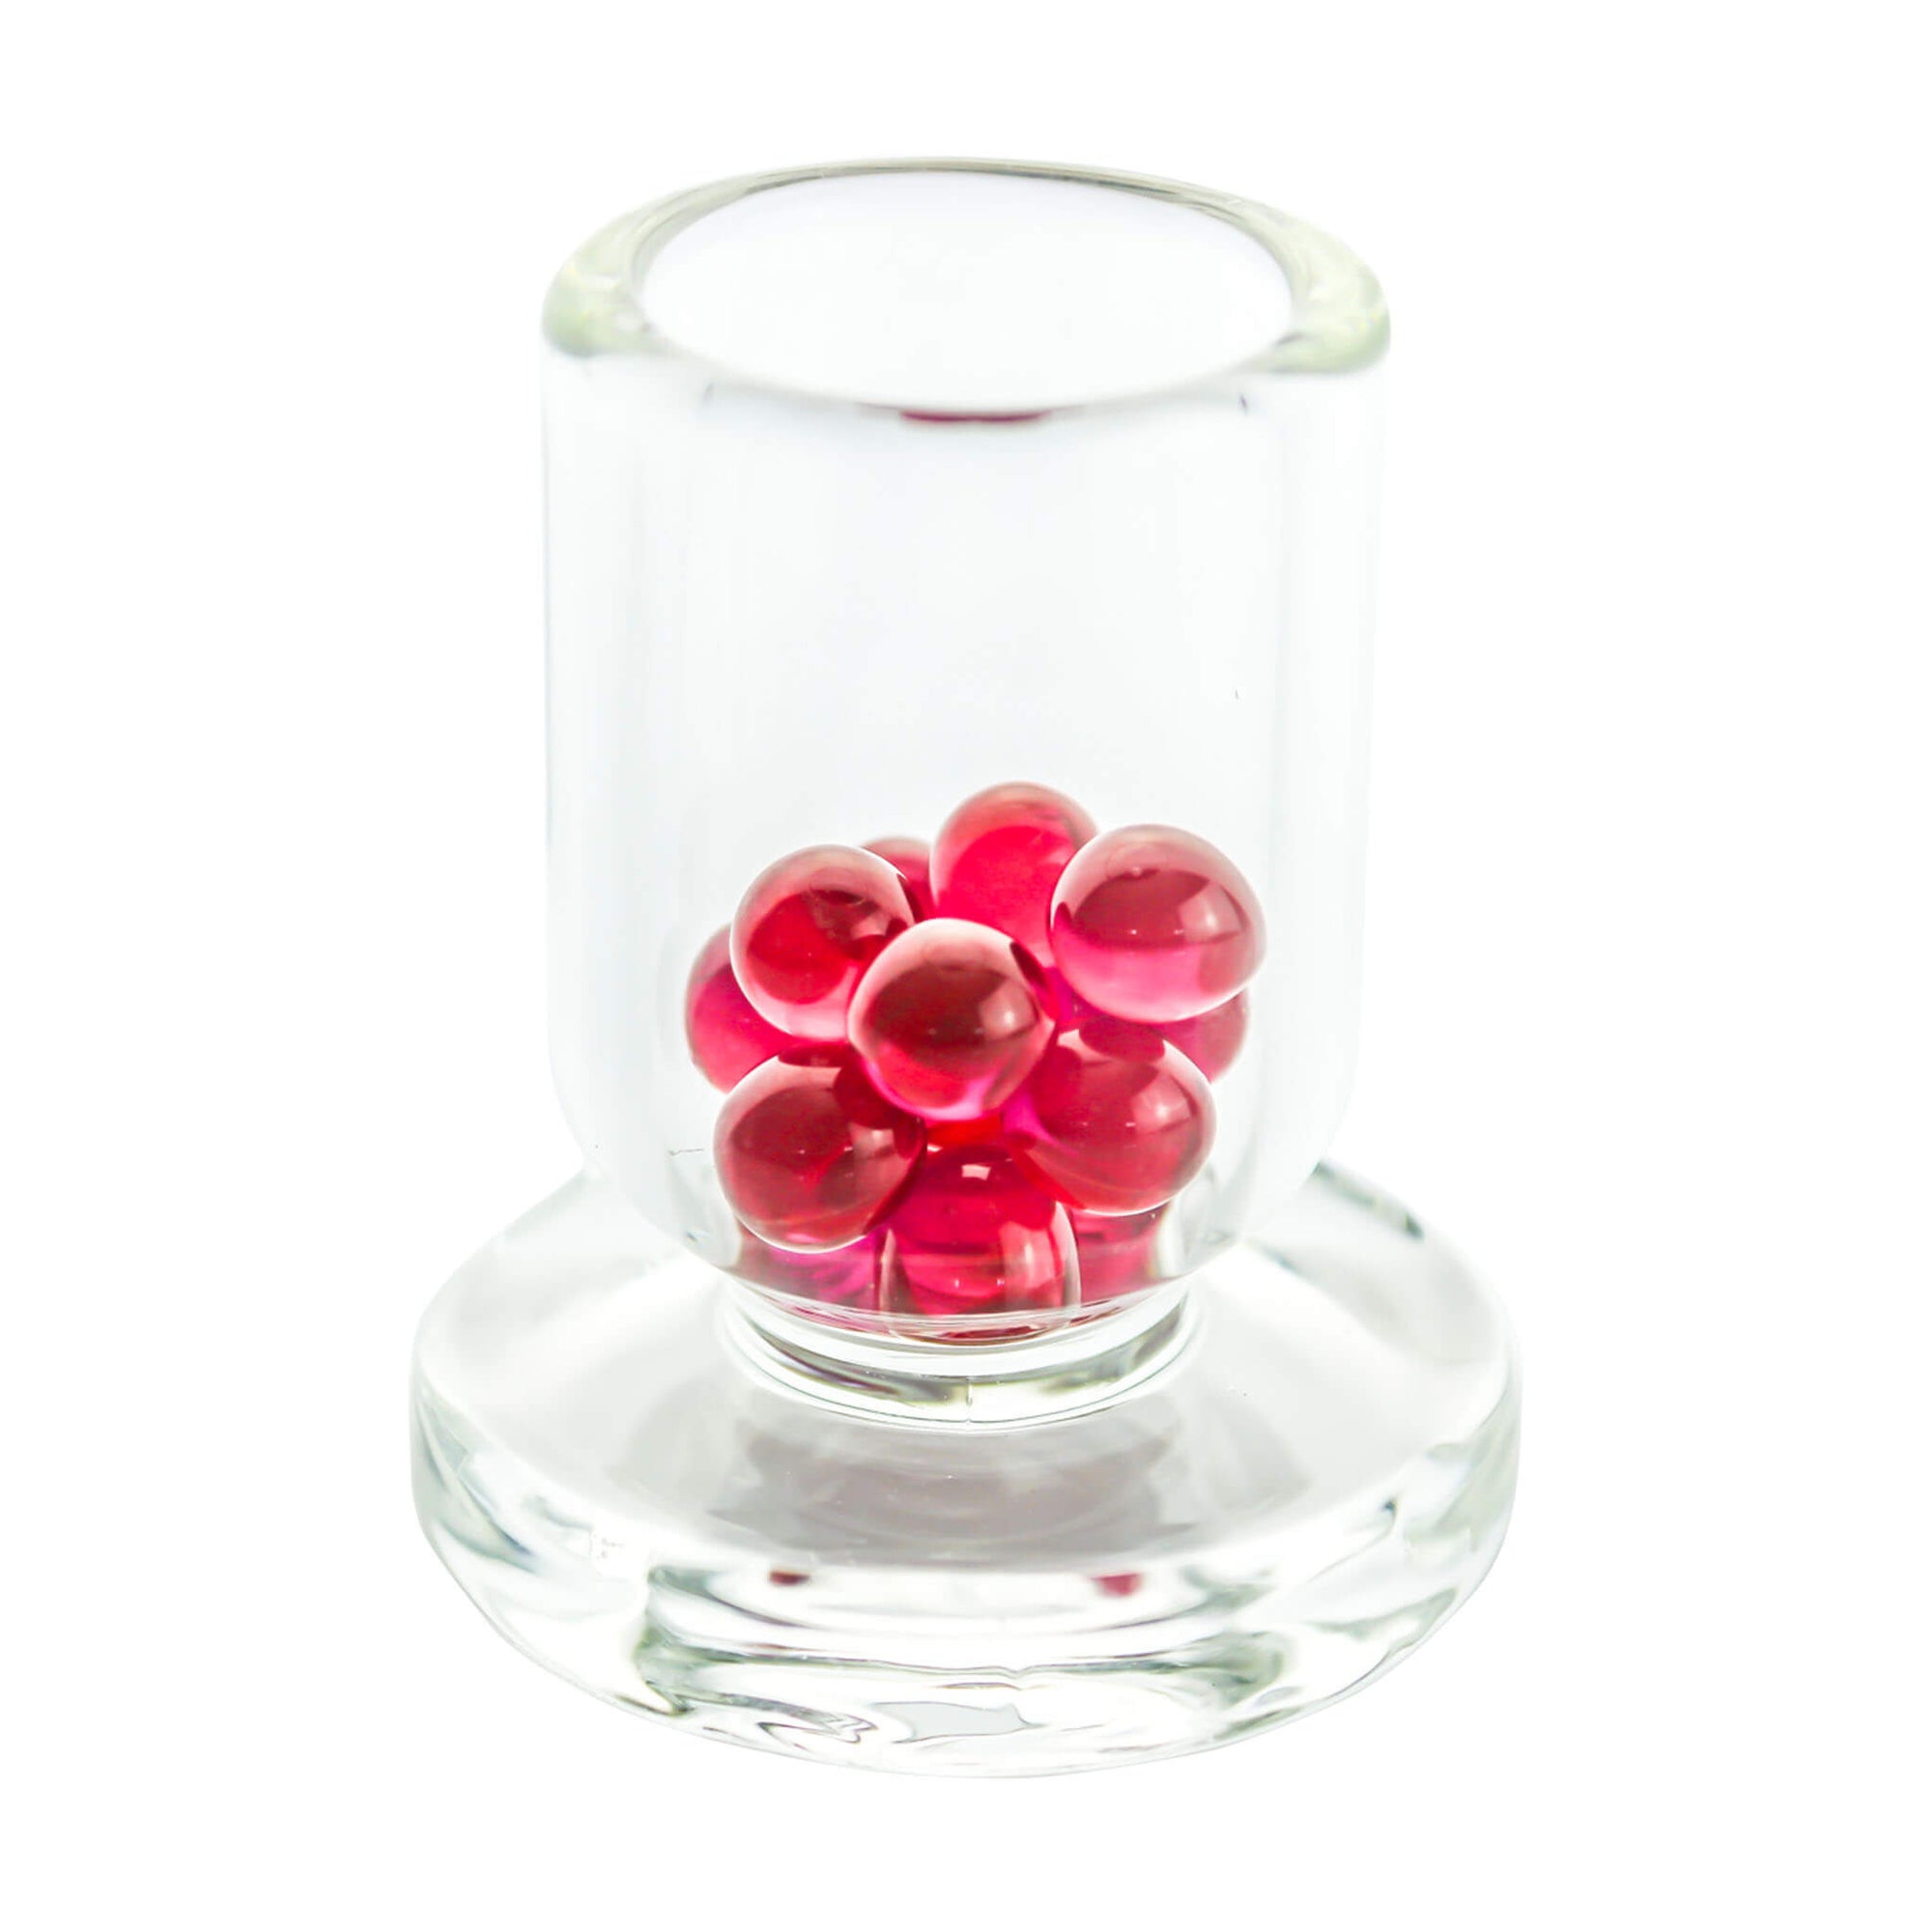 6mm Terp (Dab) Pearls-Ruby | Ruby Terp Pearls In Banger View | Dabbing Warehouse